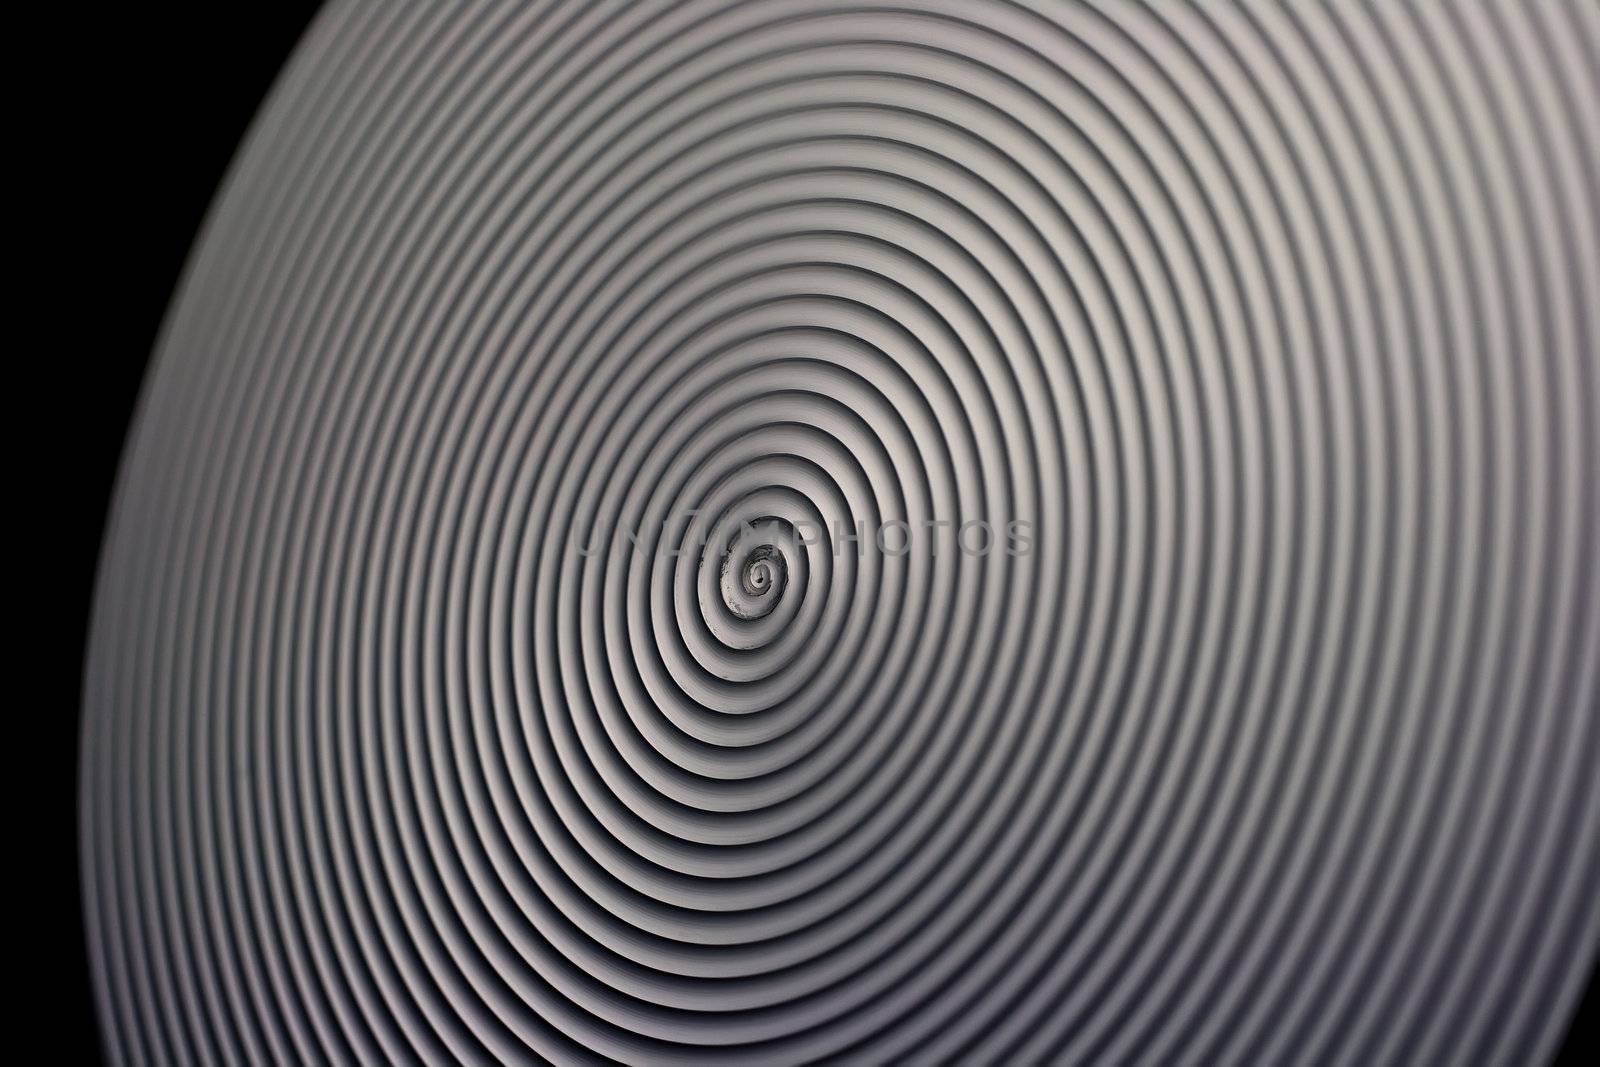 Stainless steel radial texture.  
